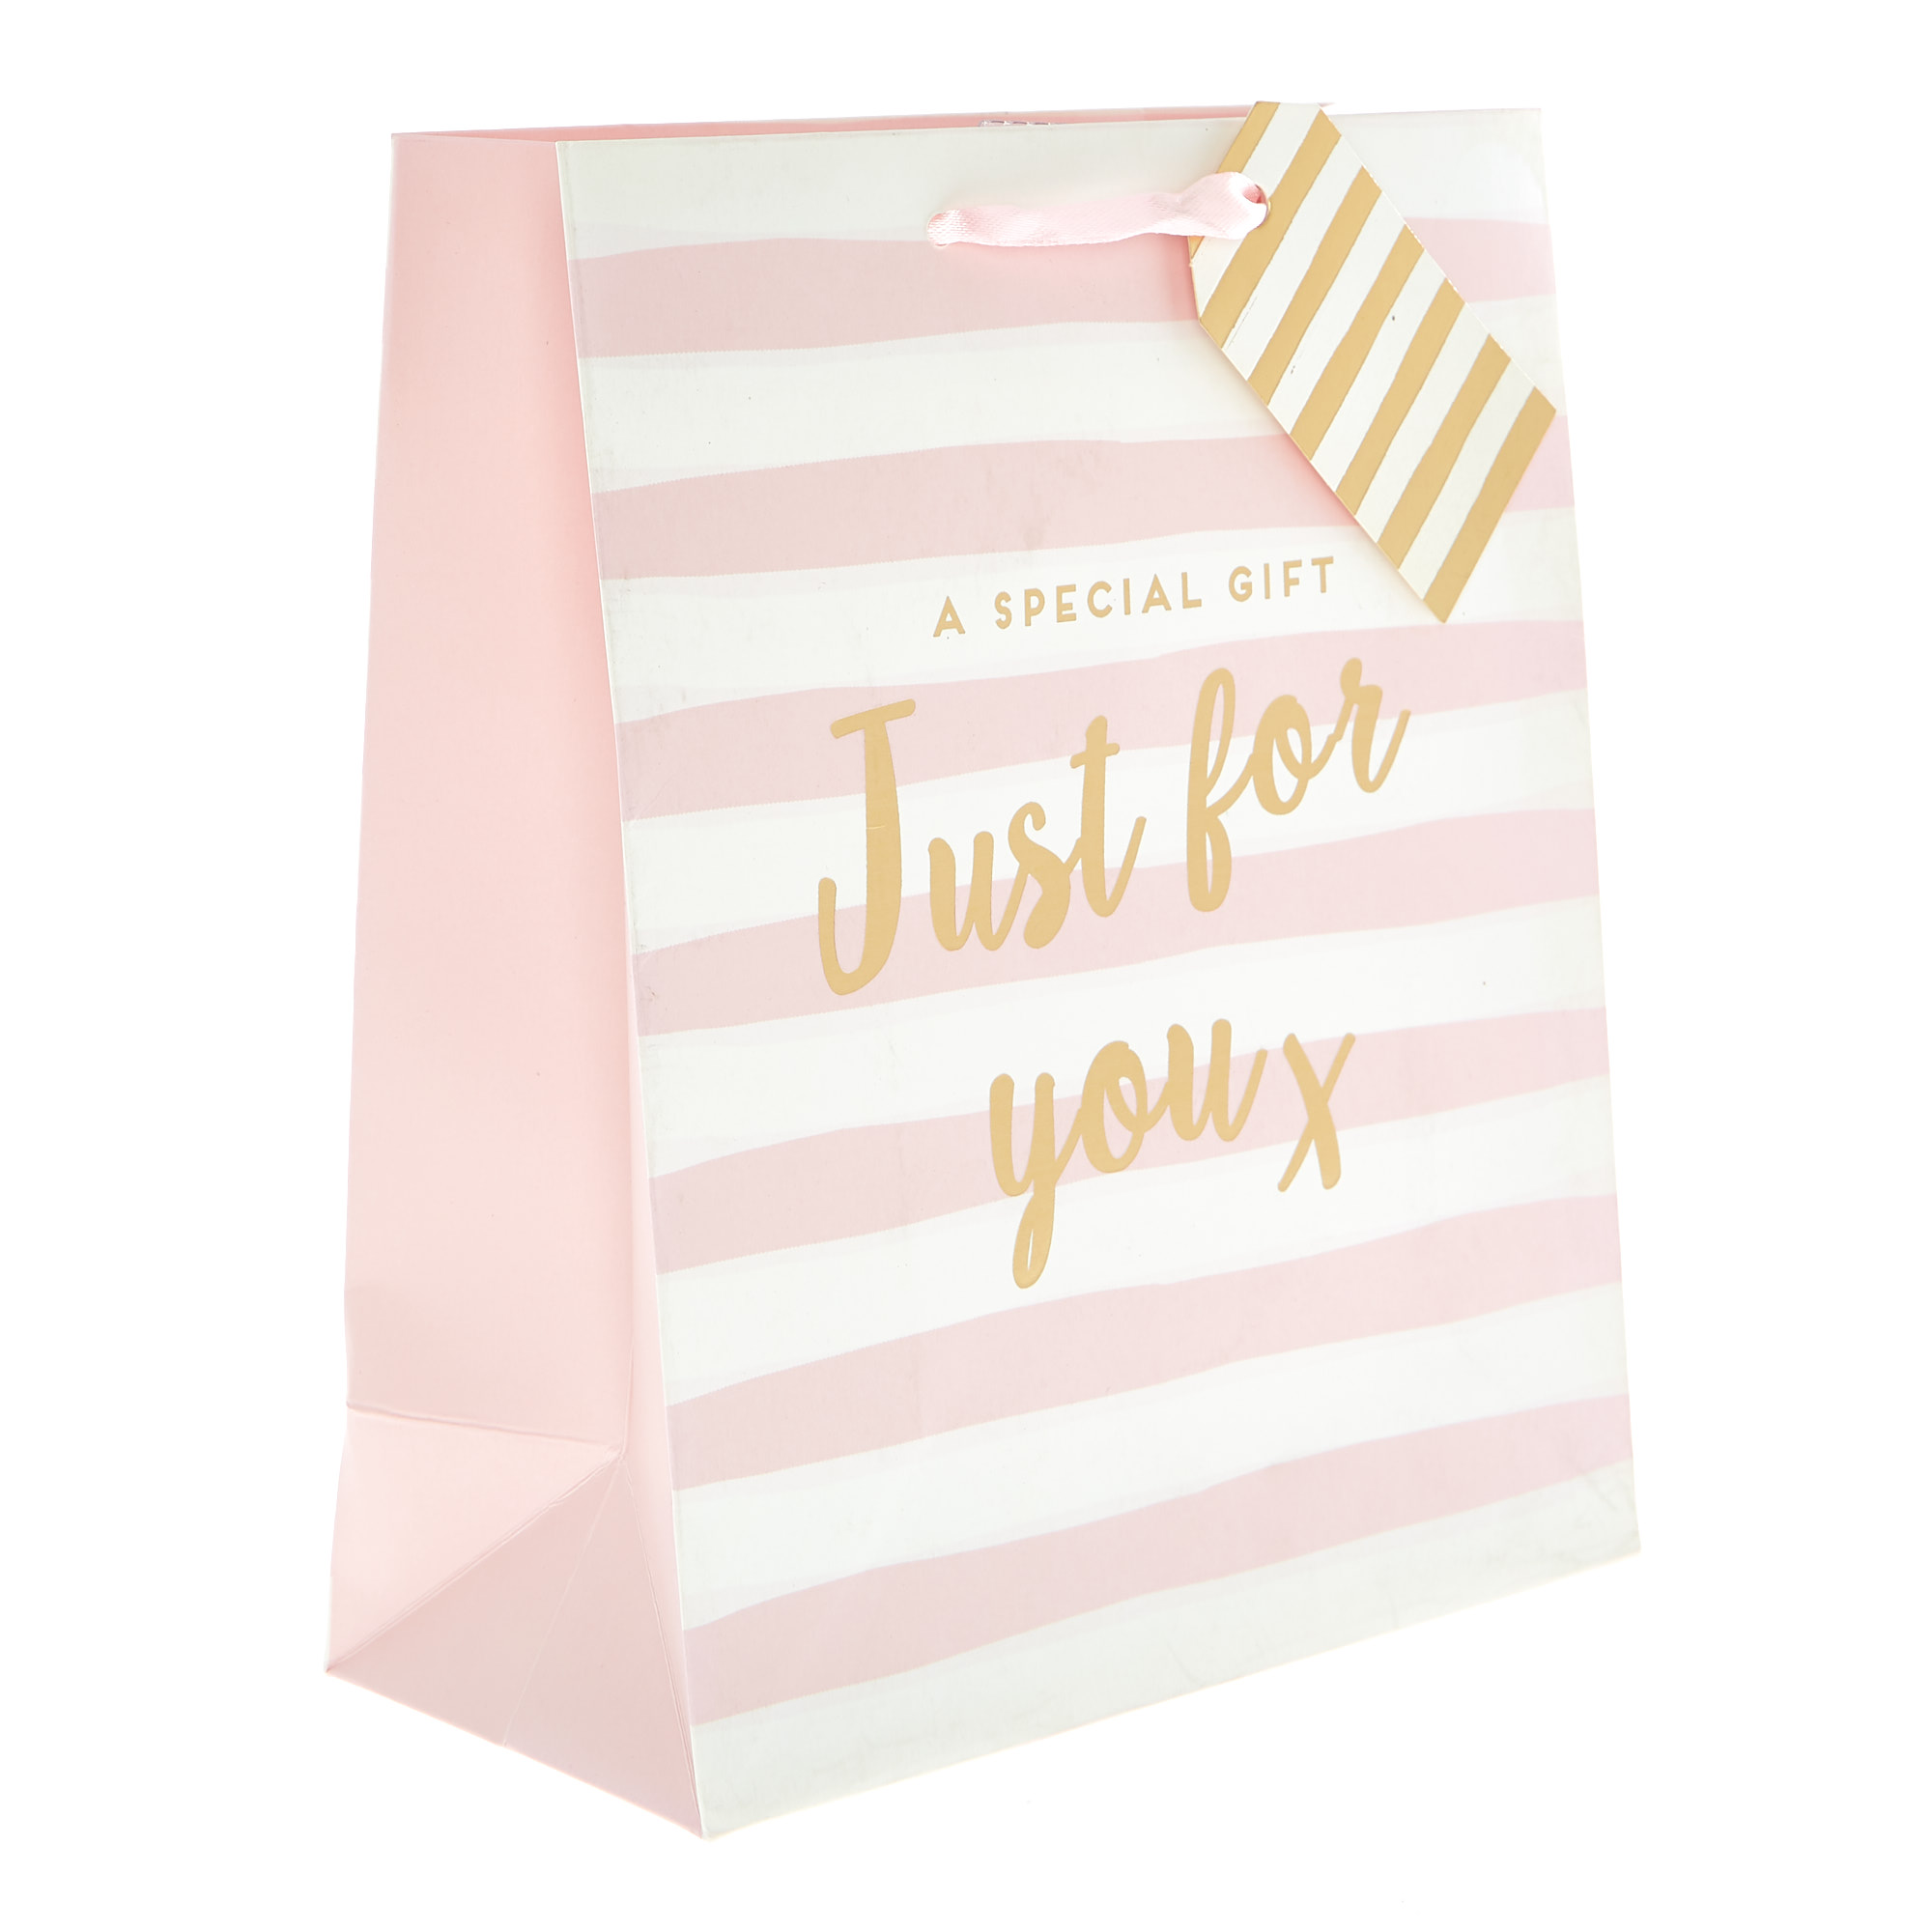 Medium Portrait Gift Bag - A Special Gift Just For You